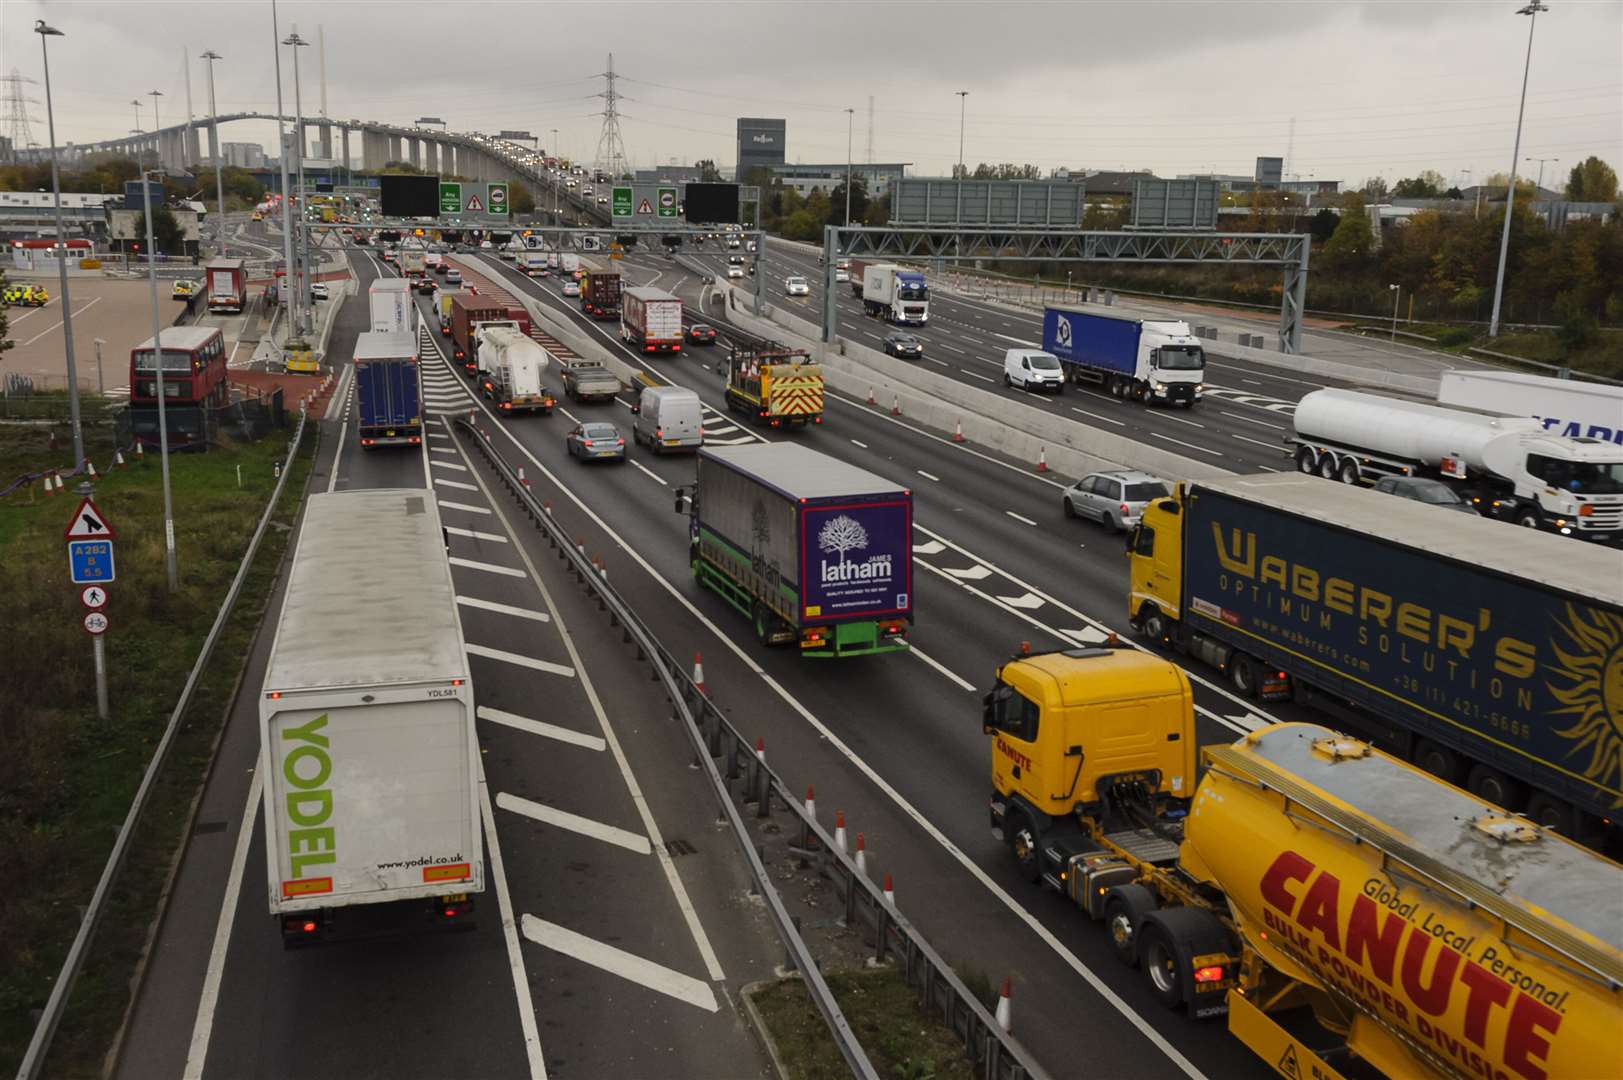 Traffic has reached a standstill on the M25 anti-clockwise between Junctions 1A and 1B near the Dartford Crossing. Picture: Andy Payton (14452388)